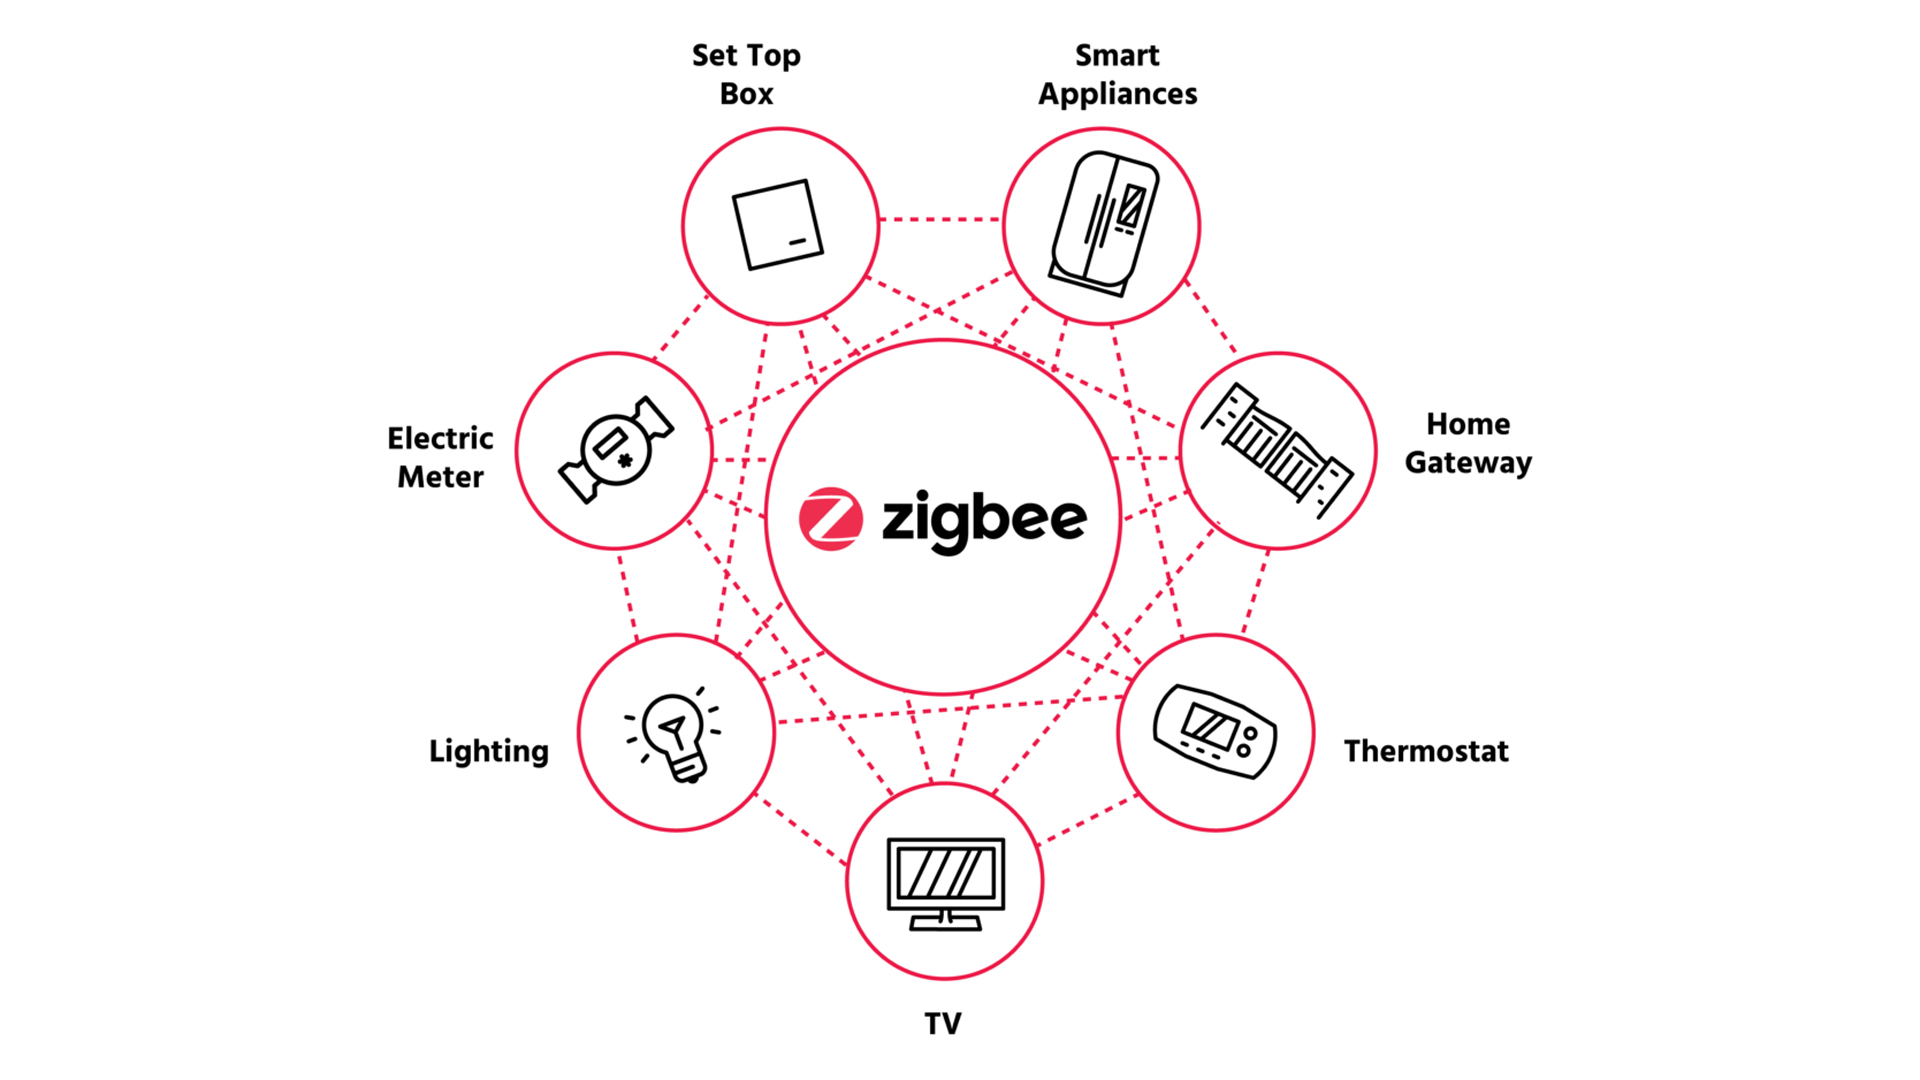 The Zigbee logo surrounded by devices